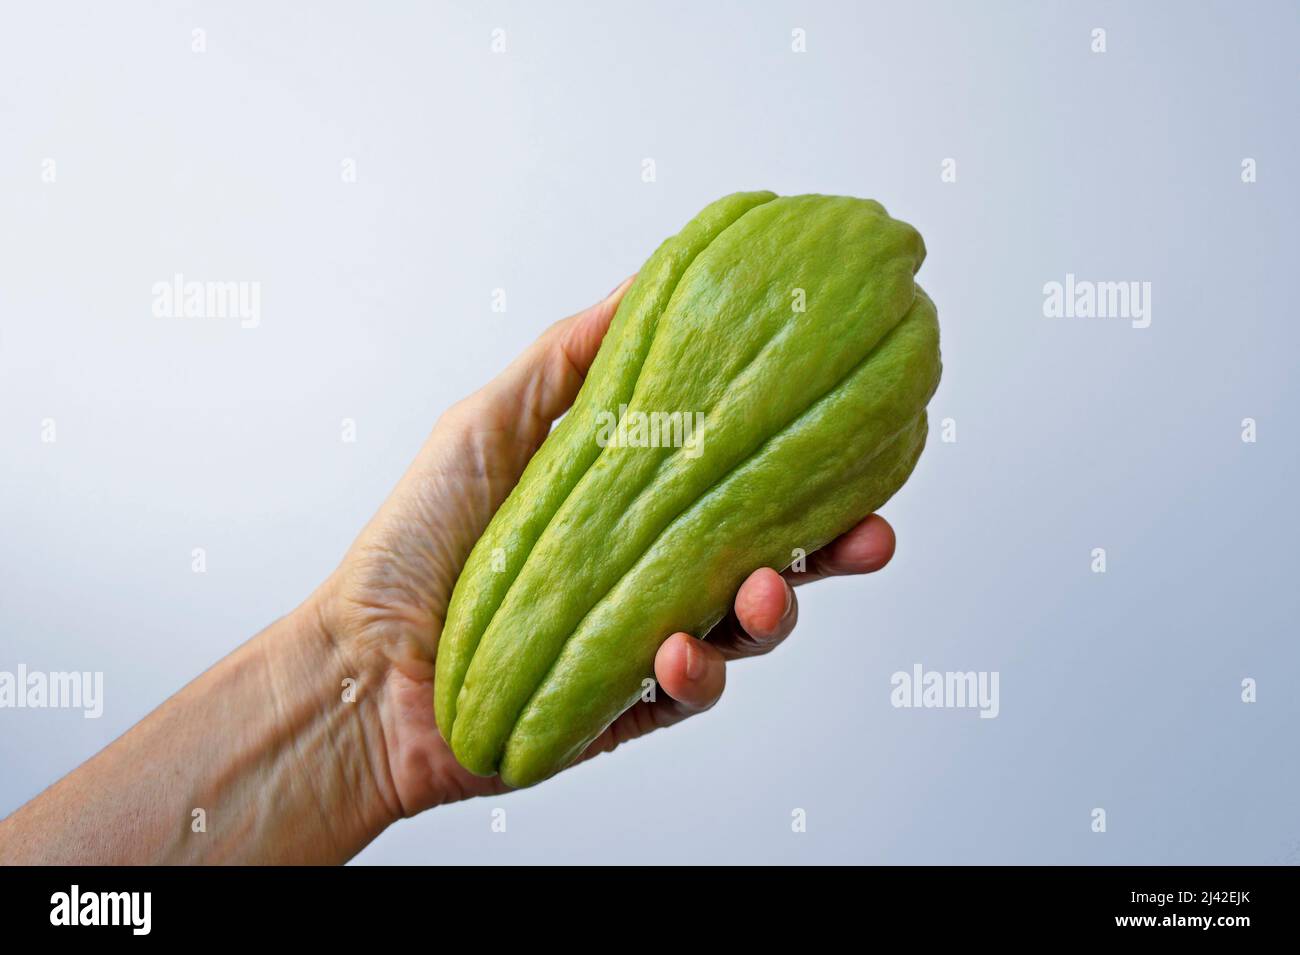 Chayote on hand in a bright background Stock Photo